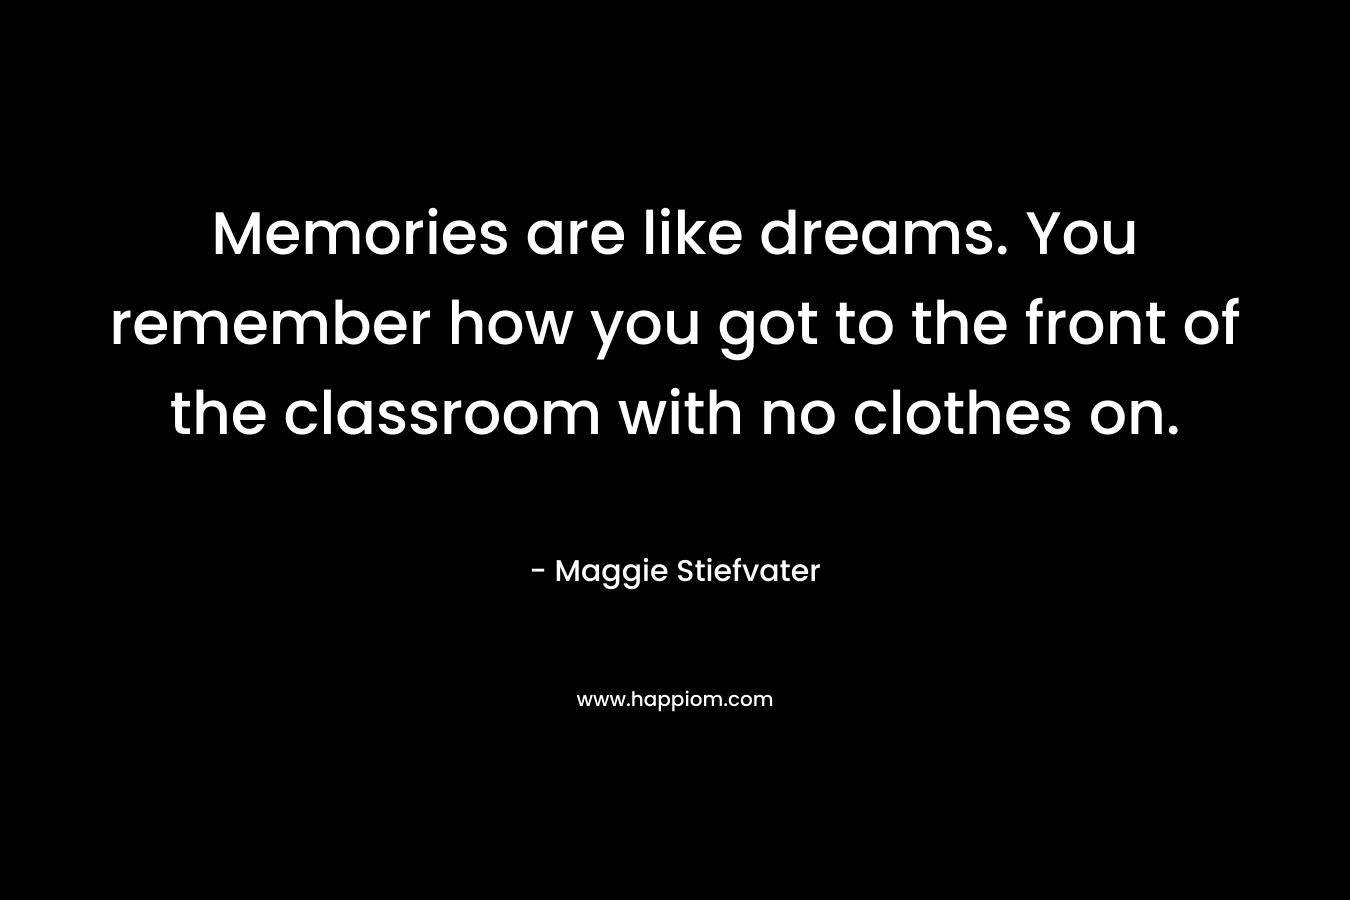 Memories are like dreams. You remember how you got to the front of the classroom with no clothes on. – Maggie Stiefvater